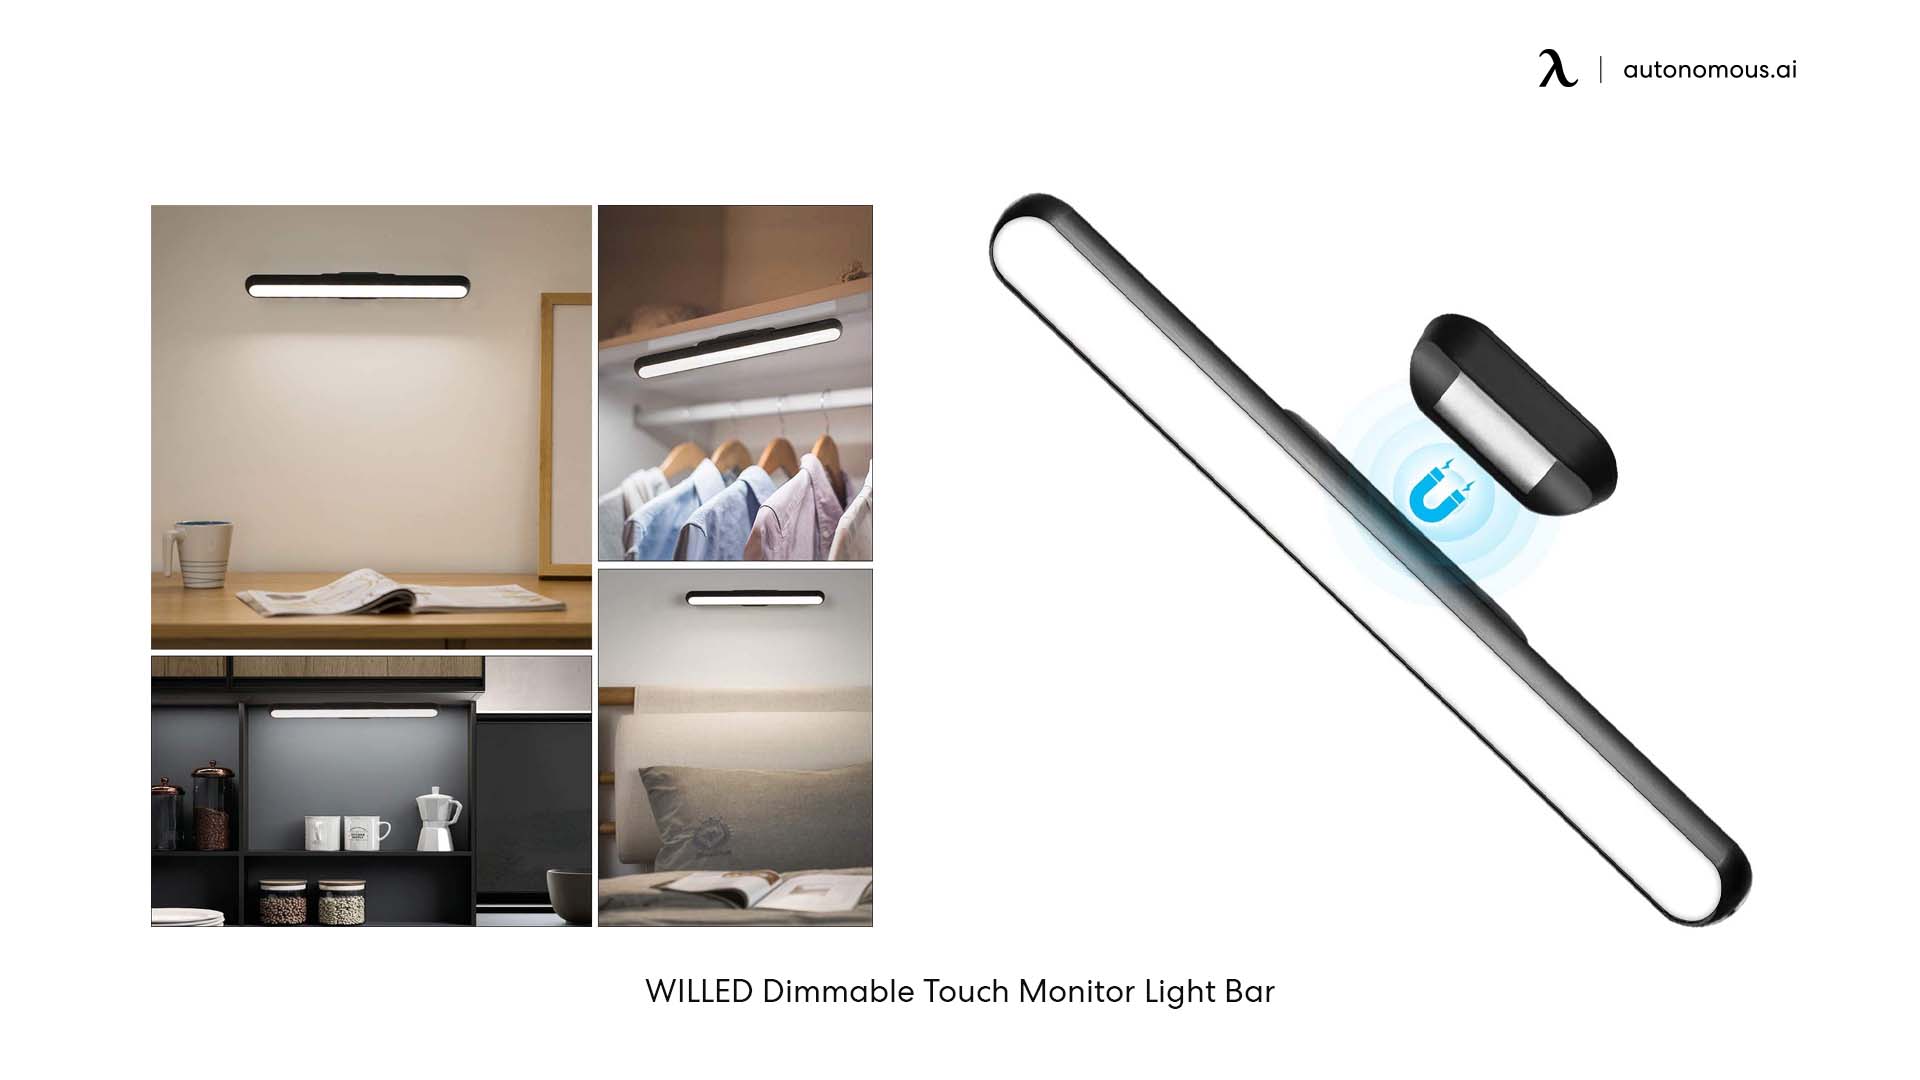 WILLED Dimmable Touch Monitor Light Bar